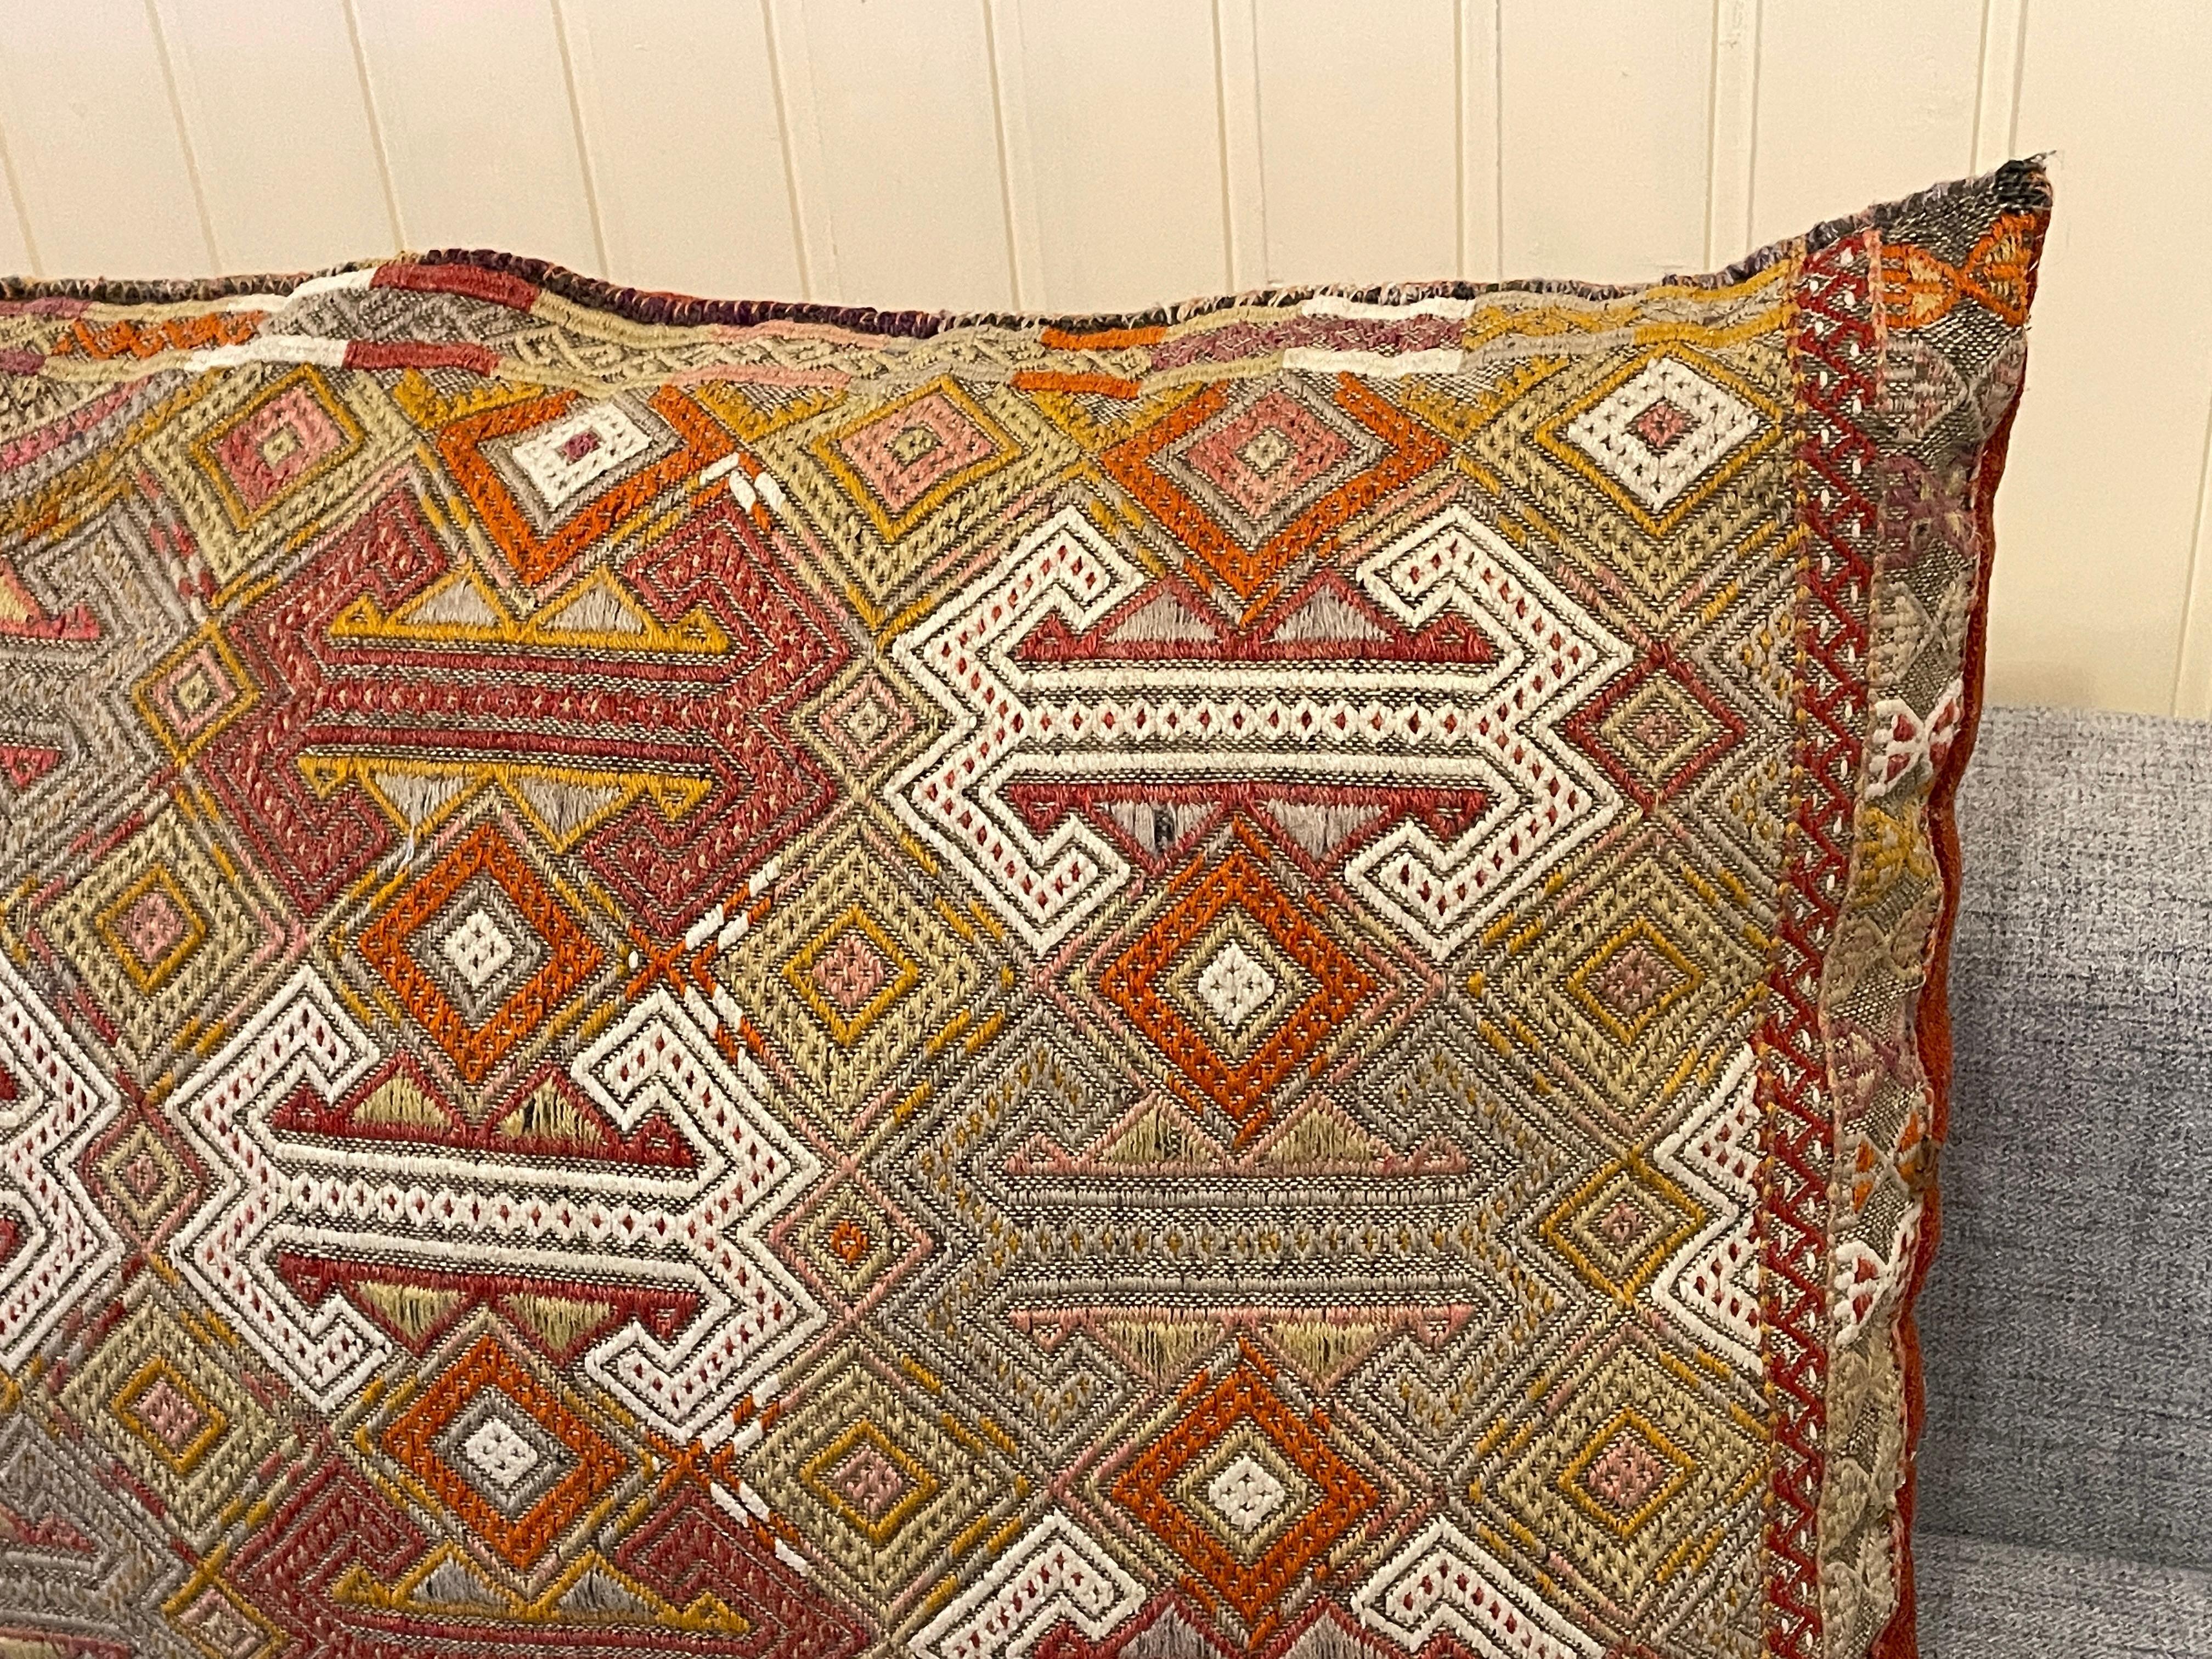 Mid-20th Century Stunning Large Gypsy Turkish Oriental Salt Bag or Rug Embroidery Pillow